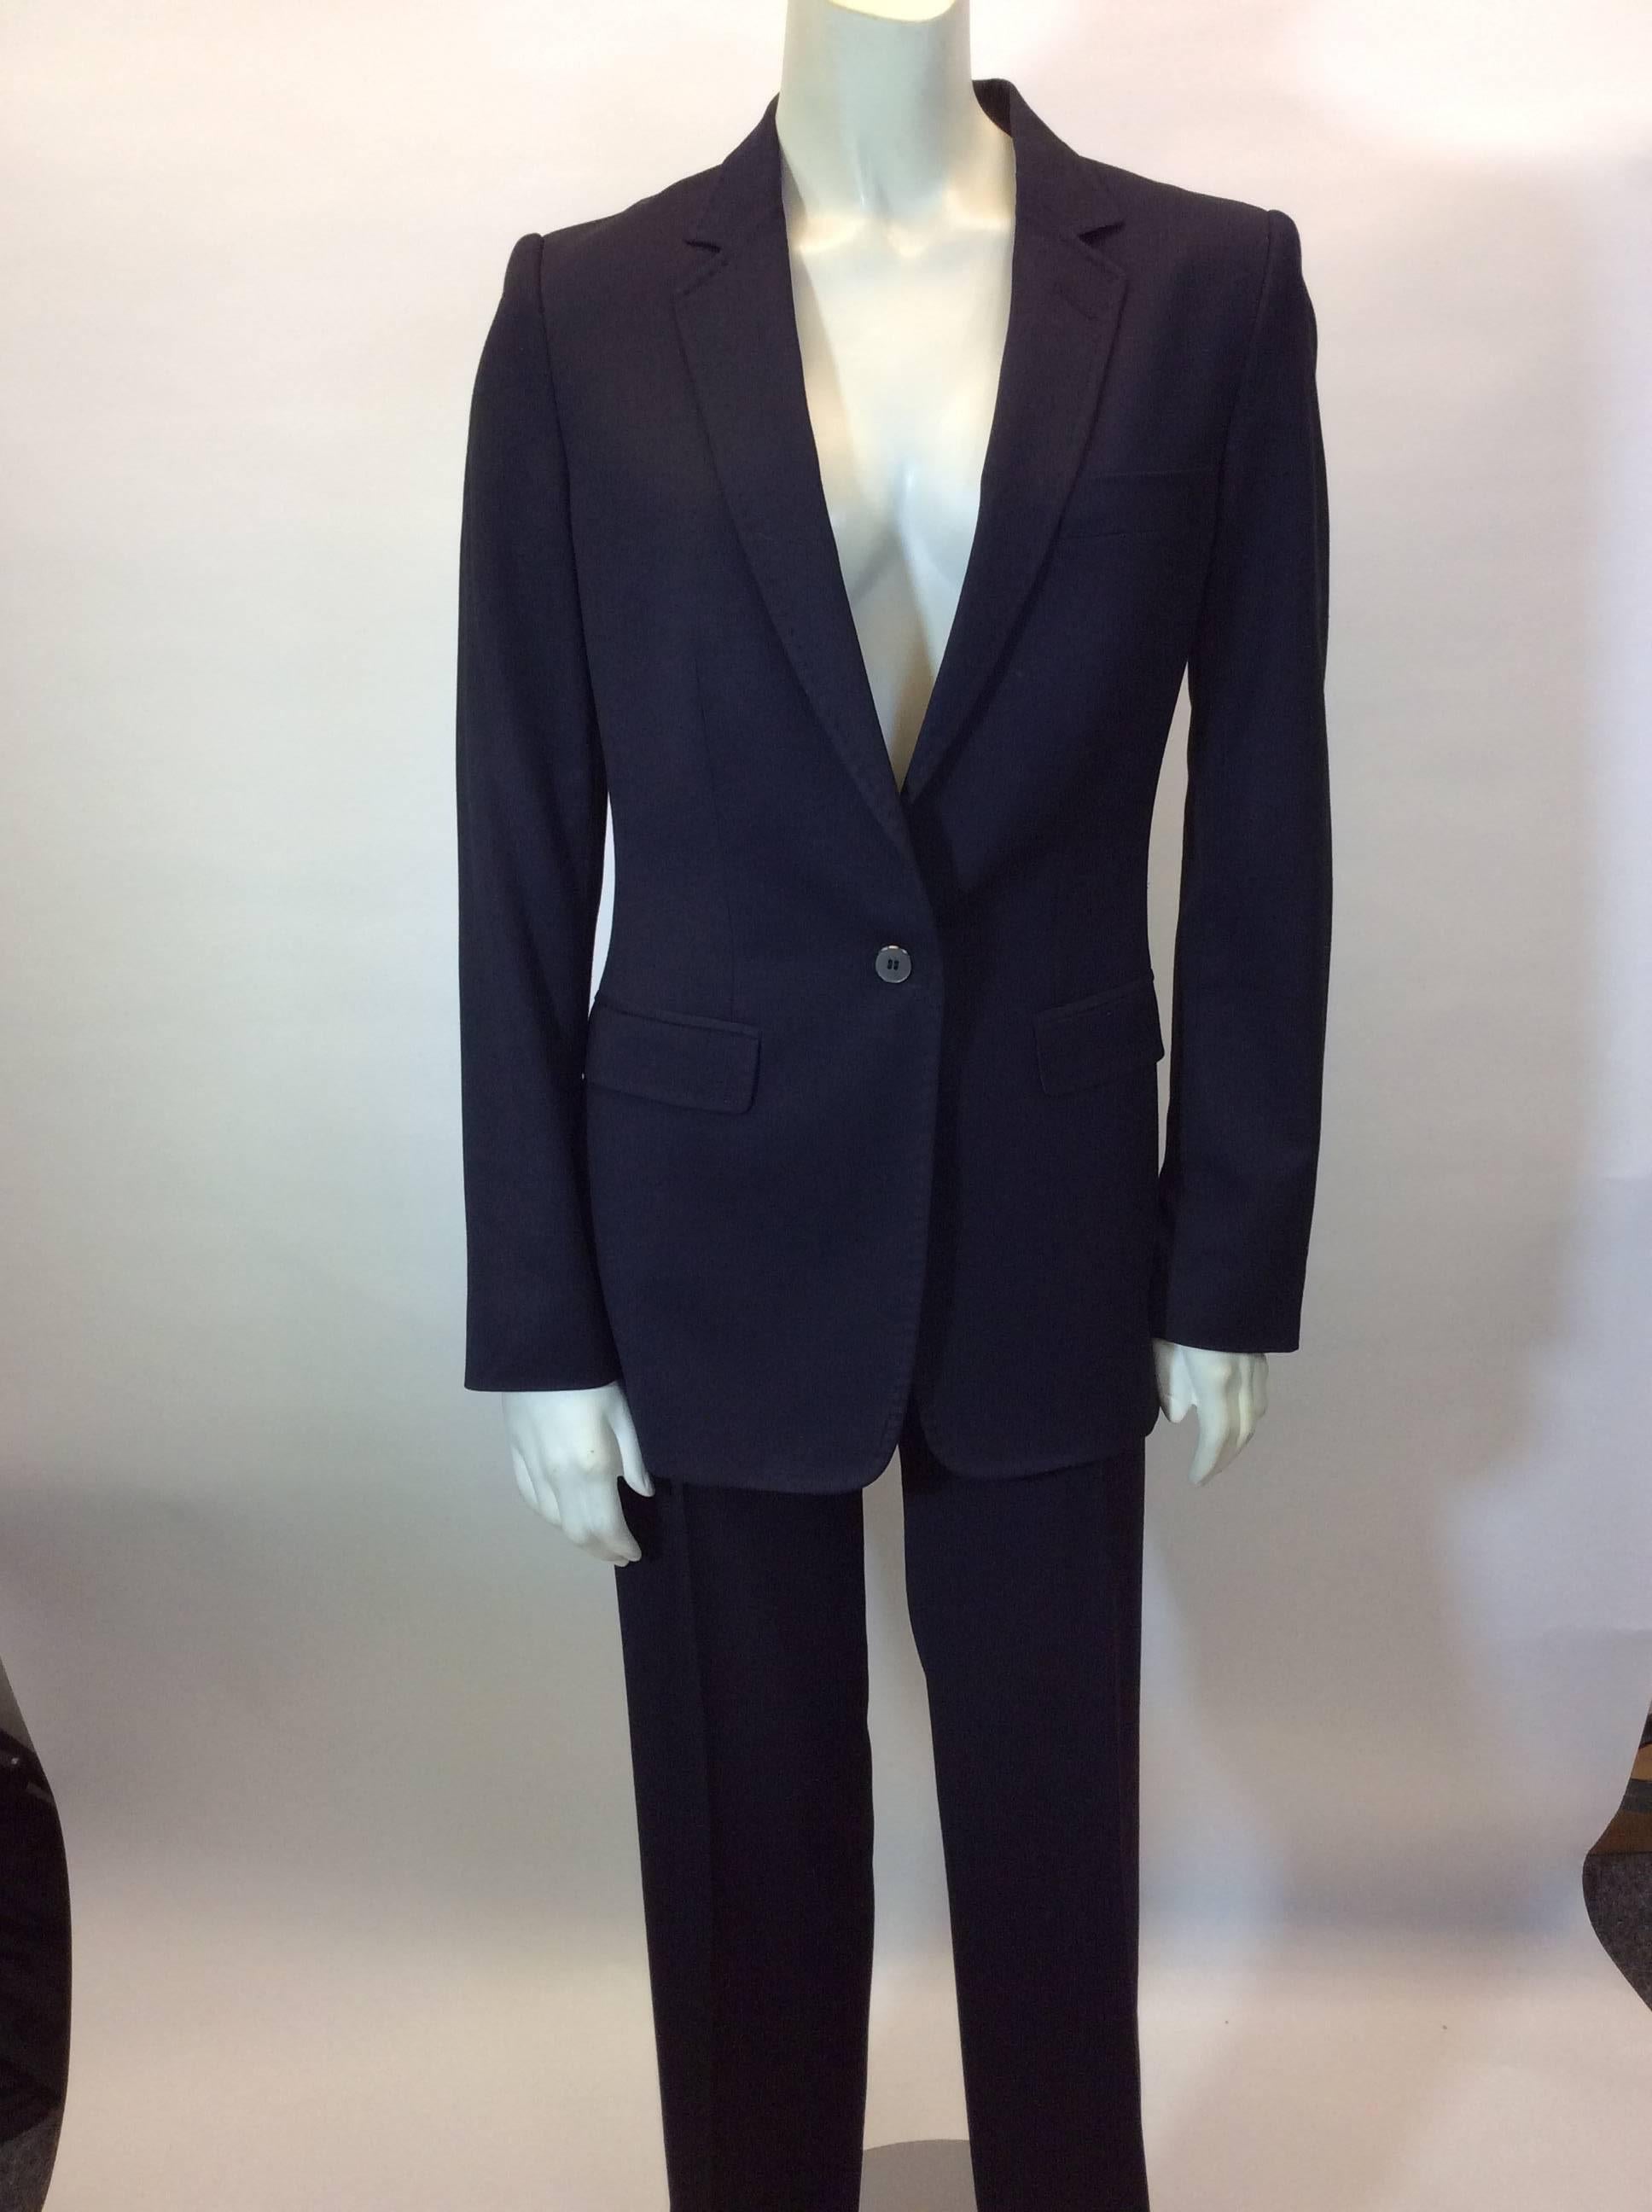 Navy Pantsuit with One Button Blazer
Blazer features two hip pockets and one chest pocket
Two hip pockets in trousers
One button closure on blazer
Full length straight leg trouser
Size 40
62% Rayon, 36% Wool, 2% Spandex